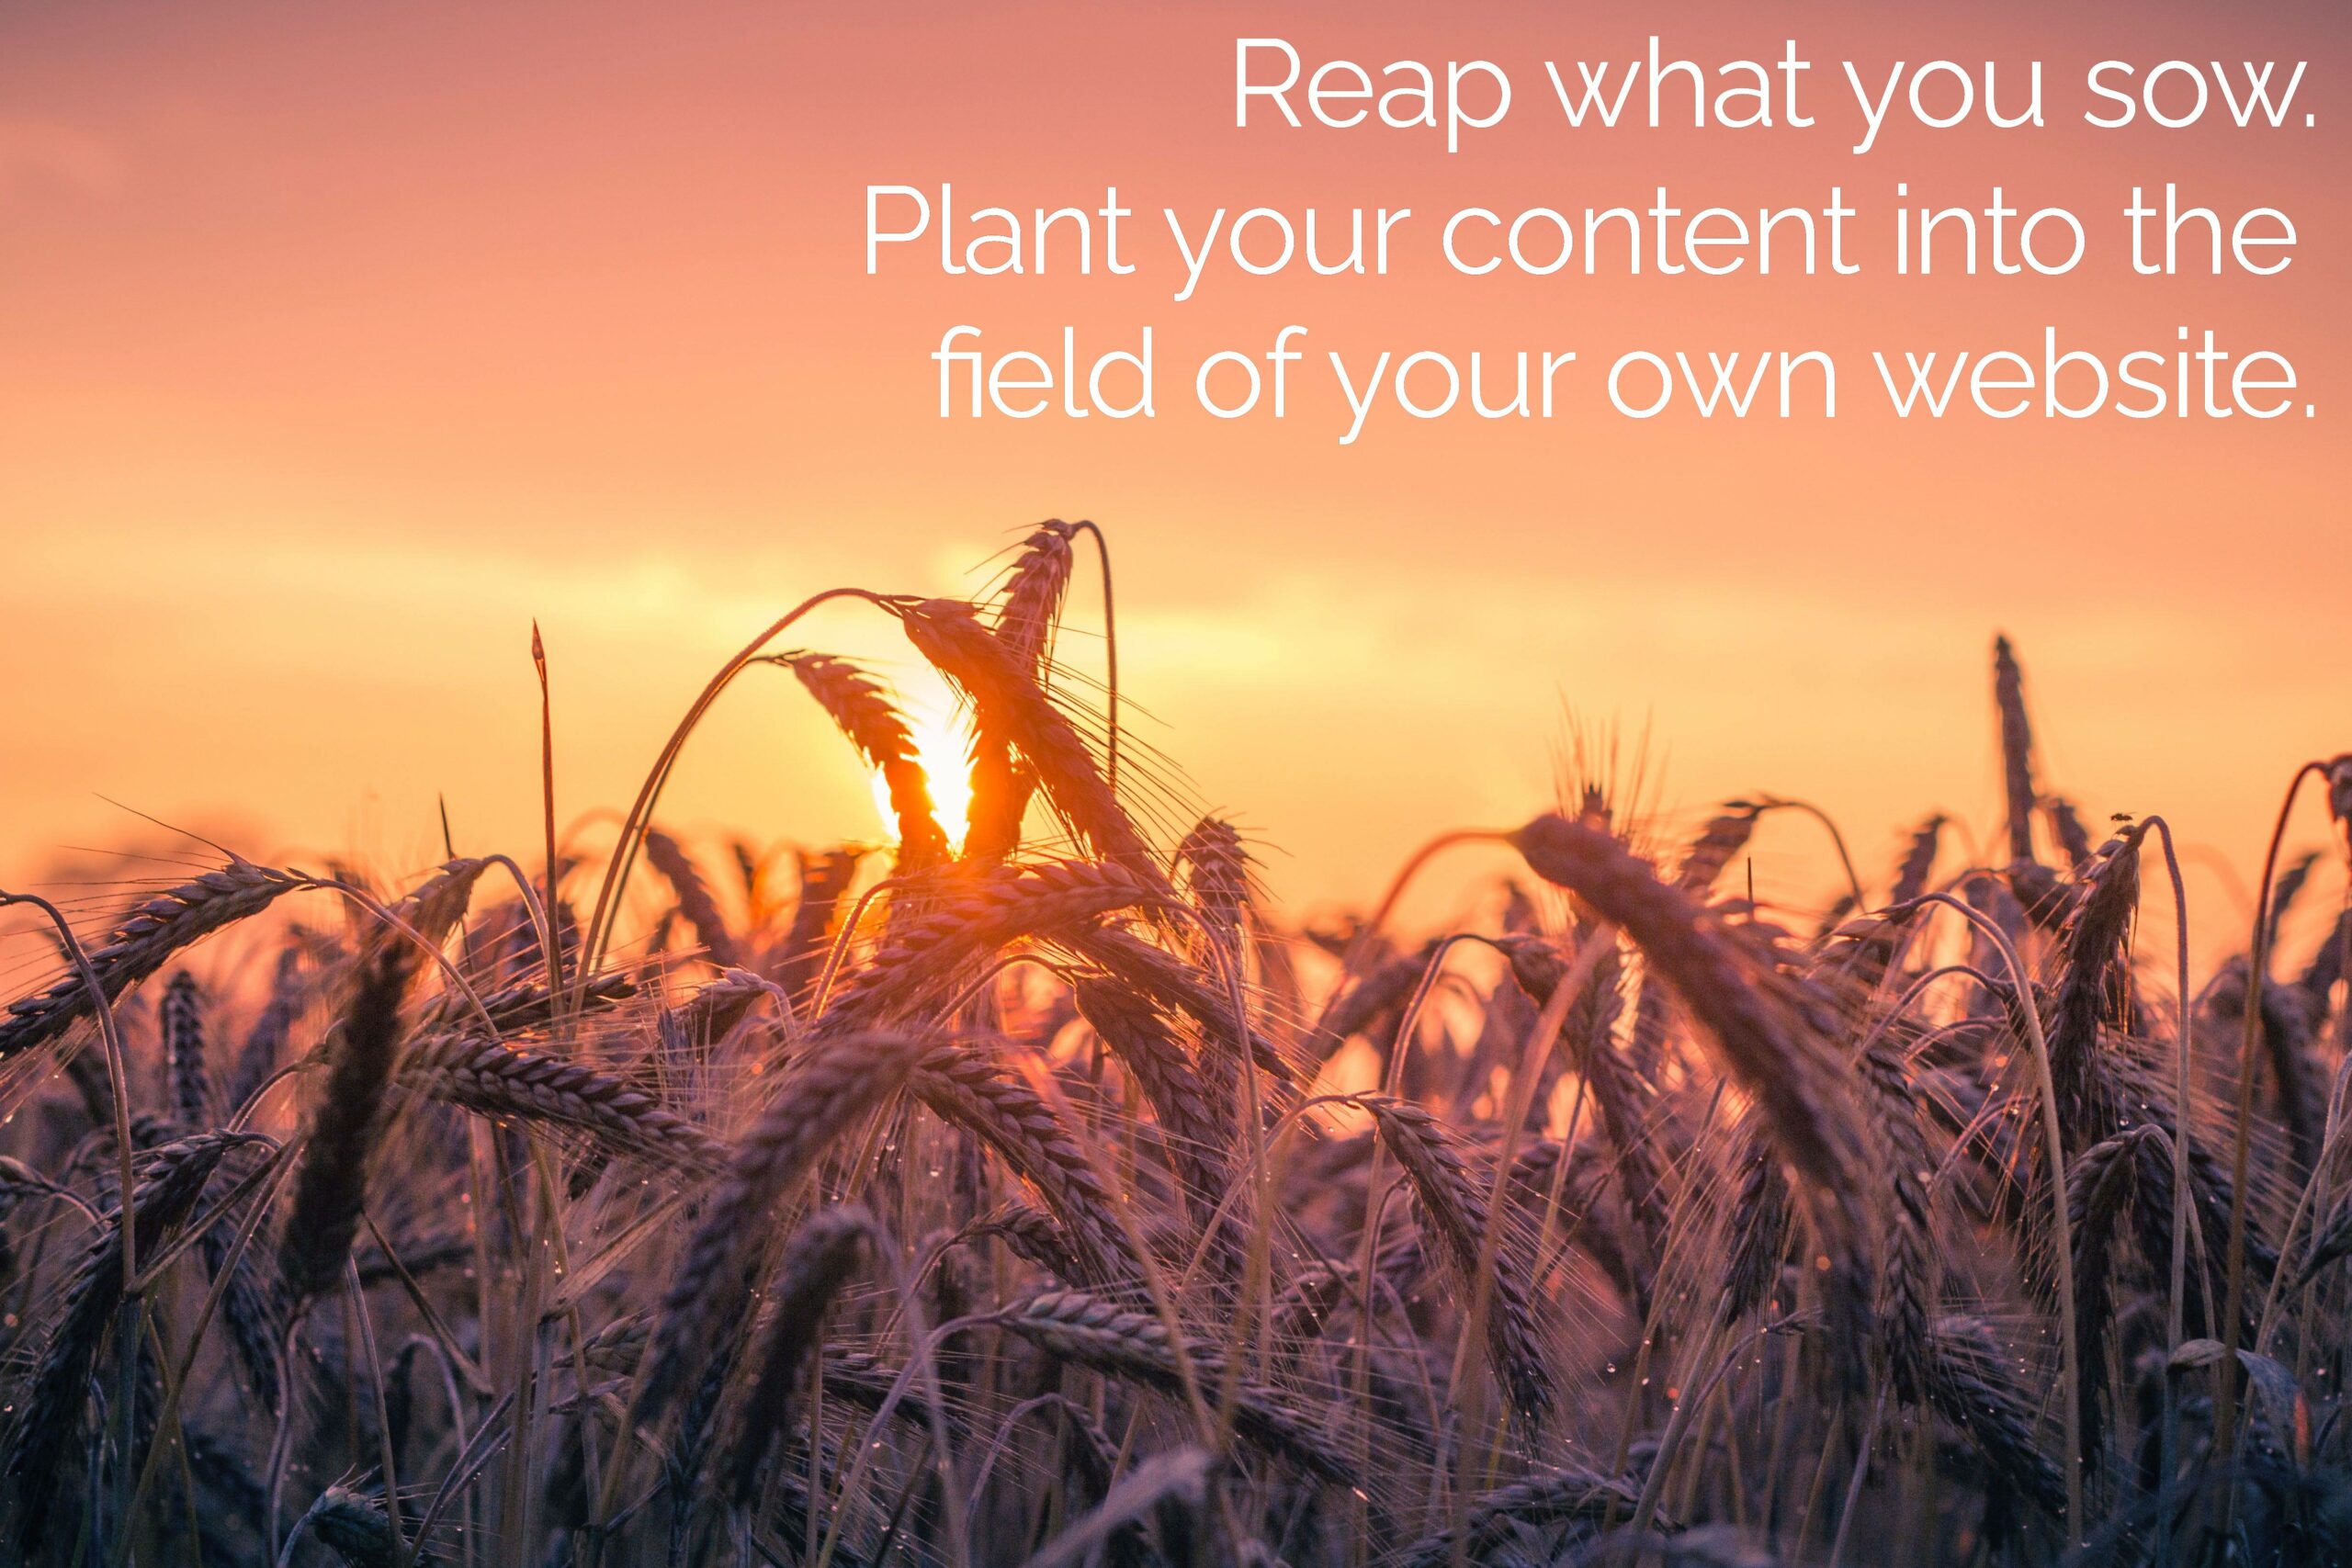 A golden cornfield with setting sun, superimposed with "Reap what you wow. Plant your content into the field of your own website."